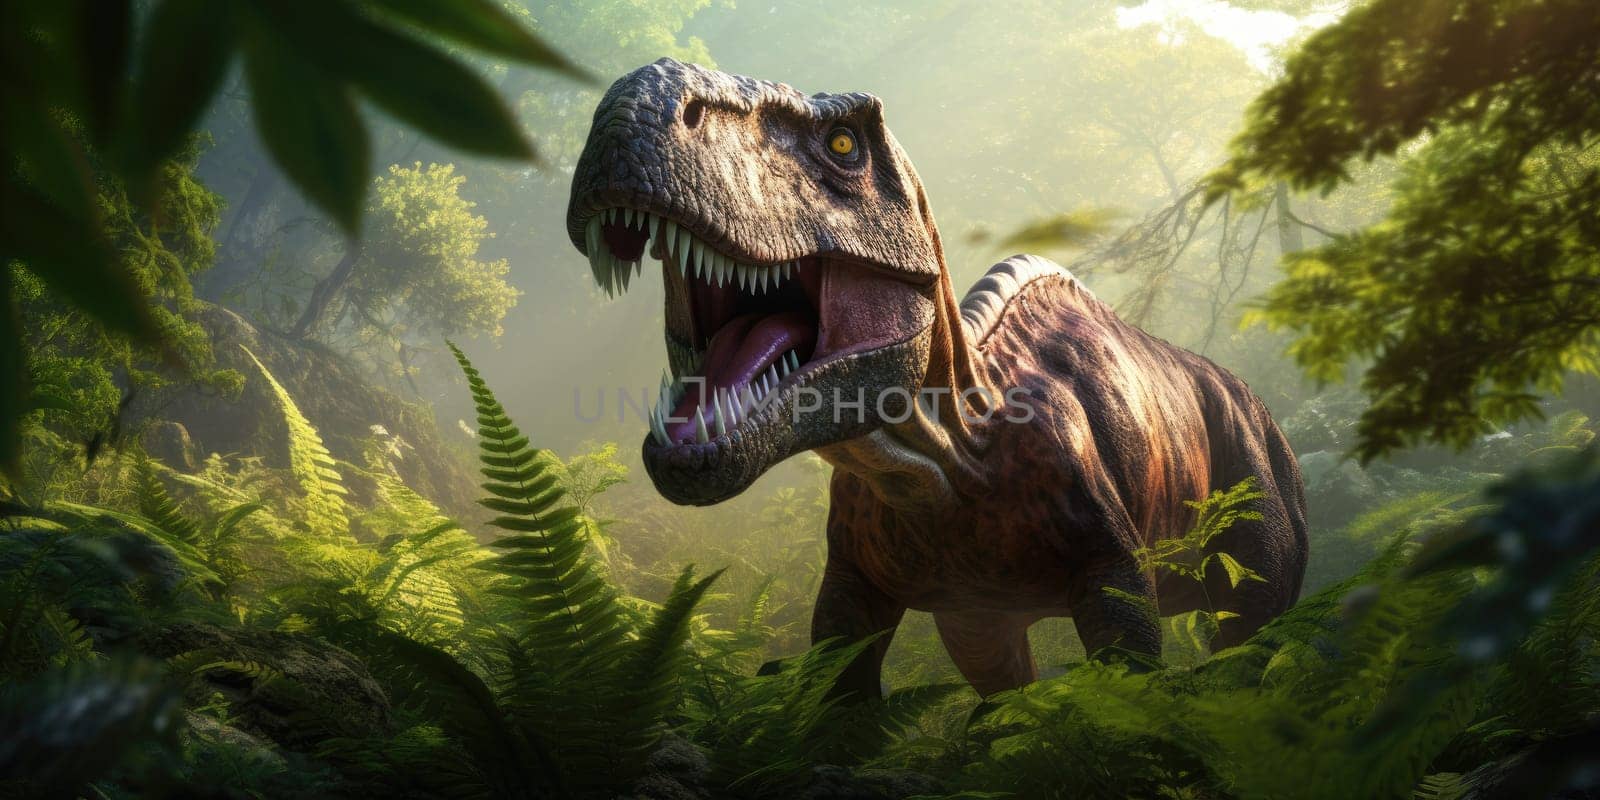 Prehistoric, mystic dinosaur in the nature, animal and wildlife concept by Kadula